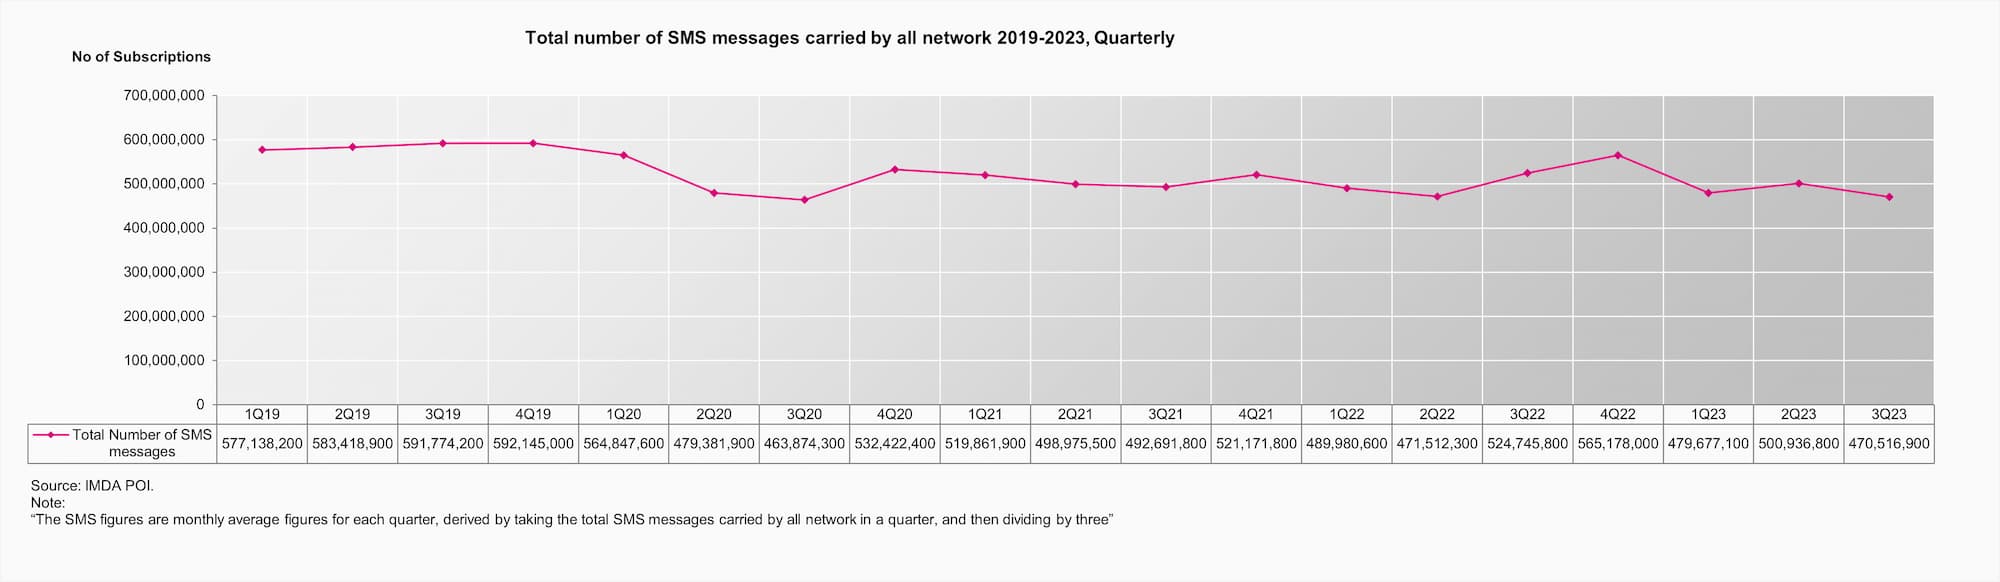 Q3 Total number of SMS messages carried by all network